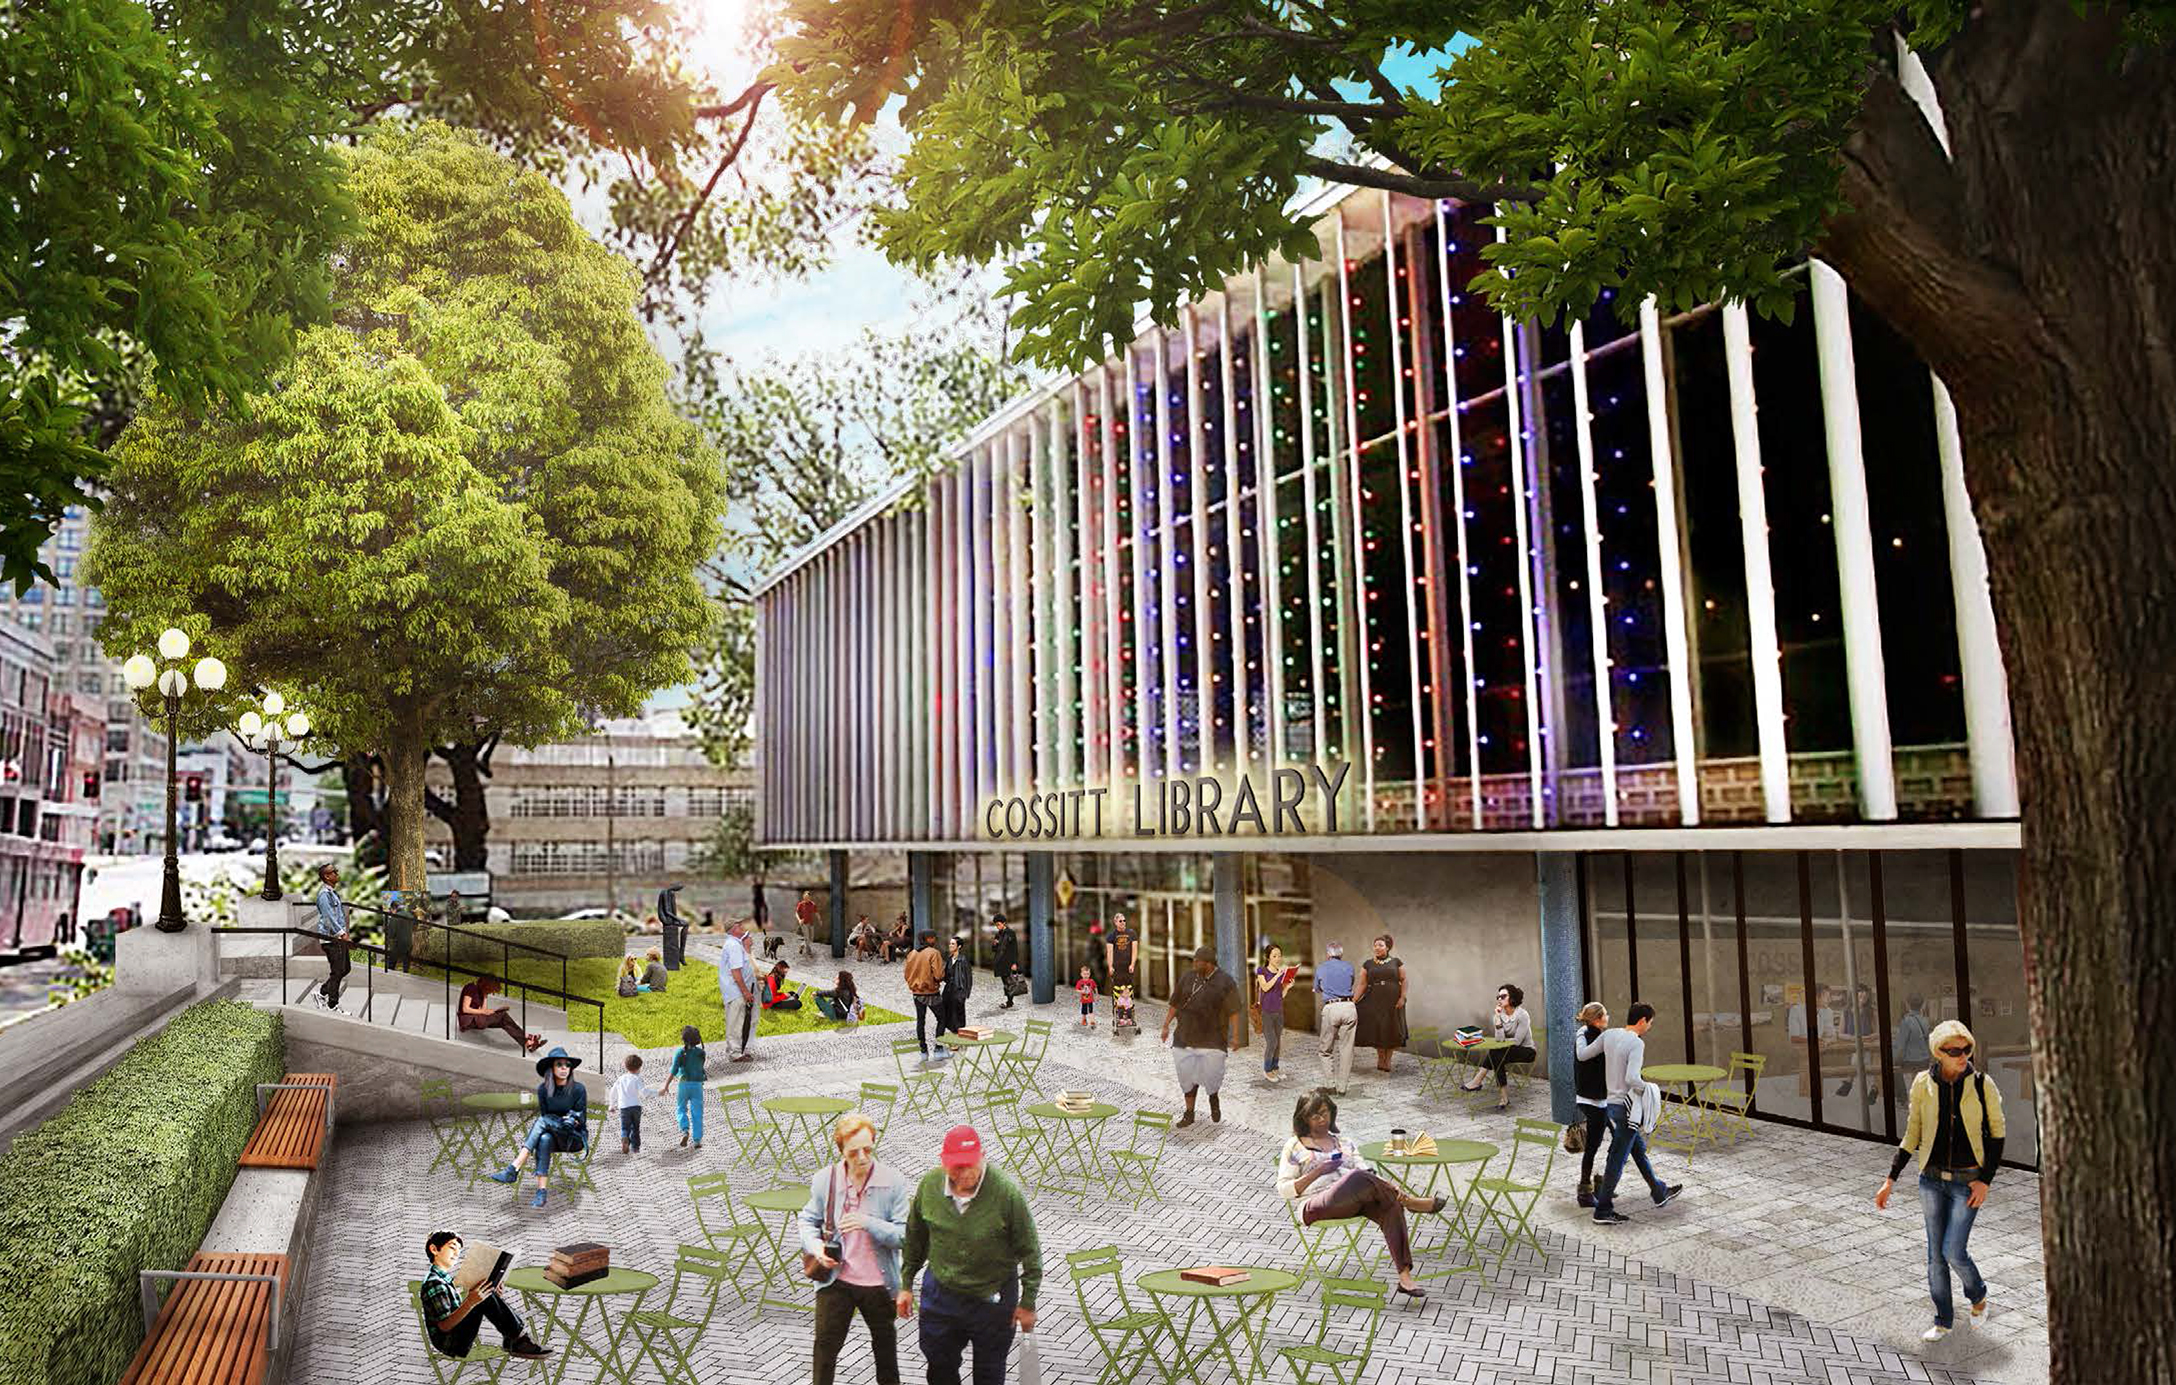 A re-imagining of the Cossit Library by Studio Gang. (Submitted Fourth Bluff)